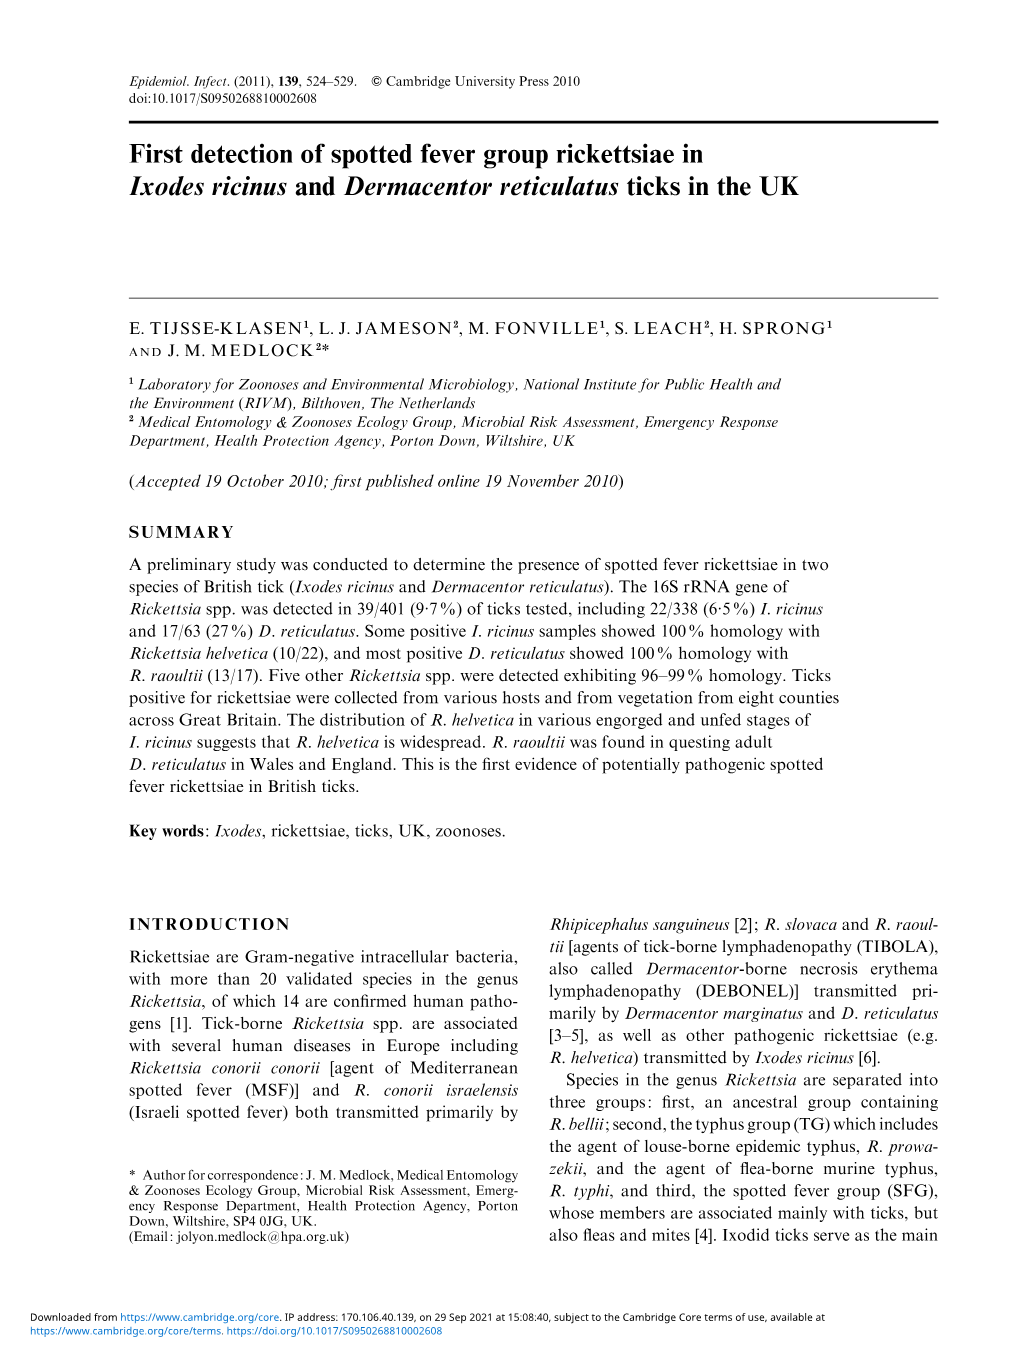 First Detection of Spotted Fever Group Rickettsiae in Ixodes Ricinus and Dermacentor Reticulatus Ticks in the UK